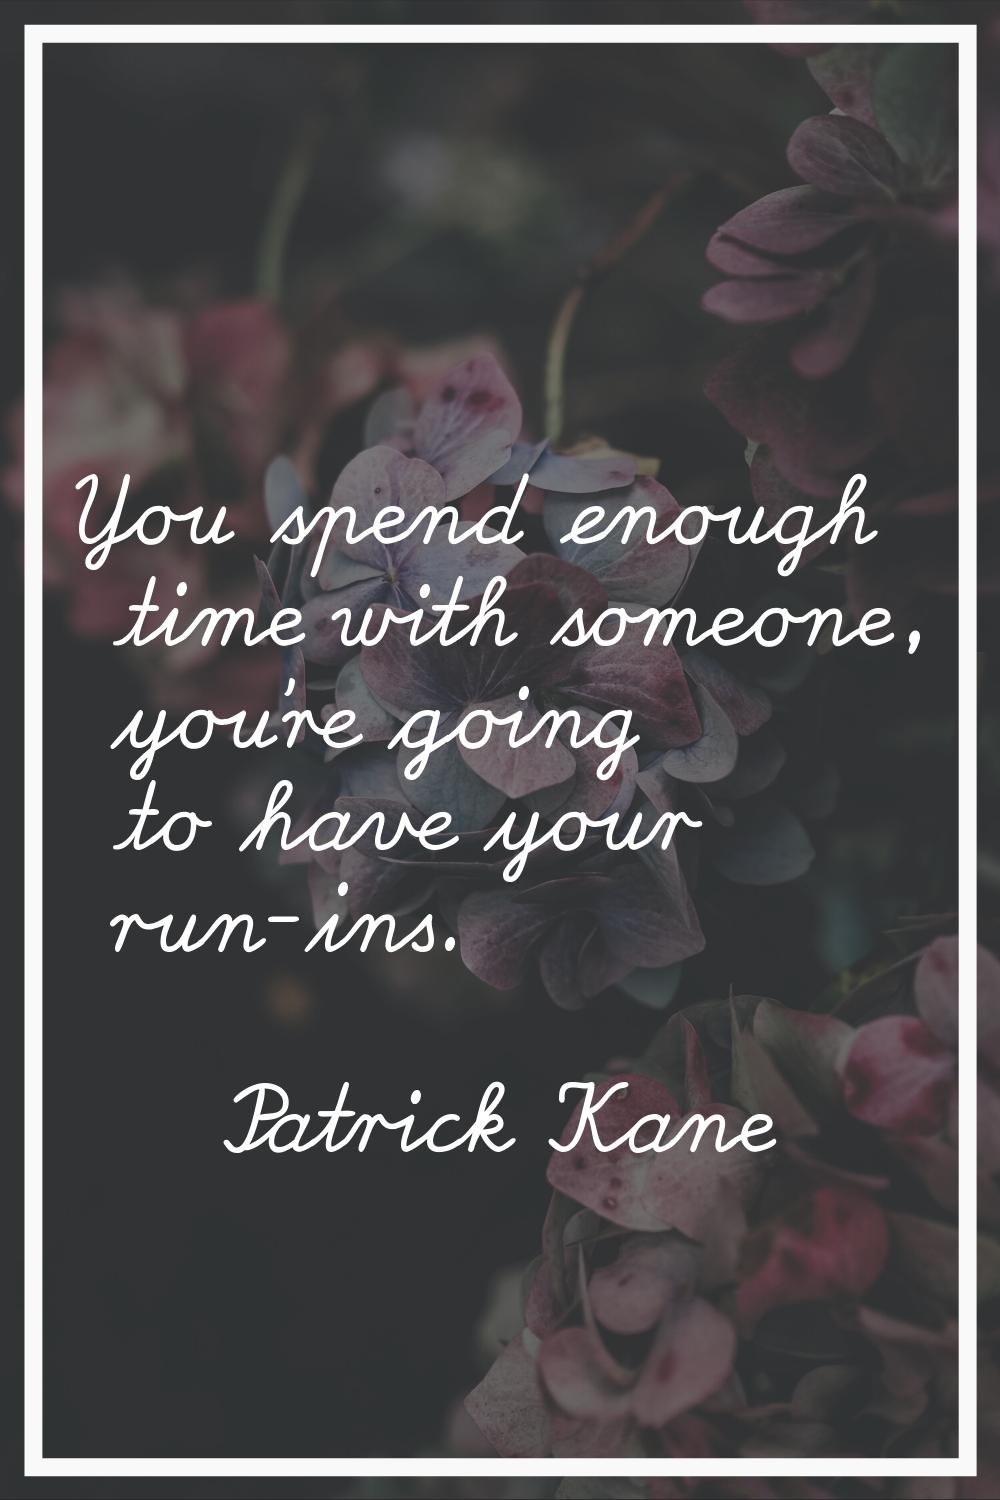 You spend enough time with someone, you're going to have your run-ins.